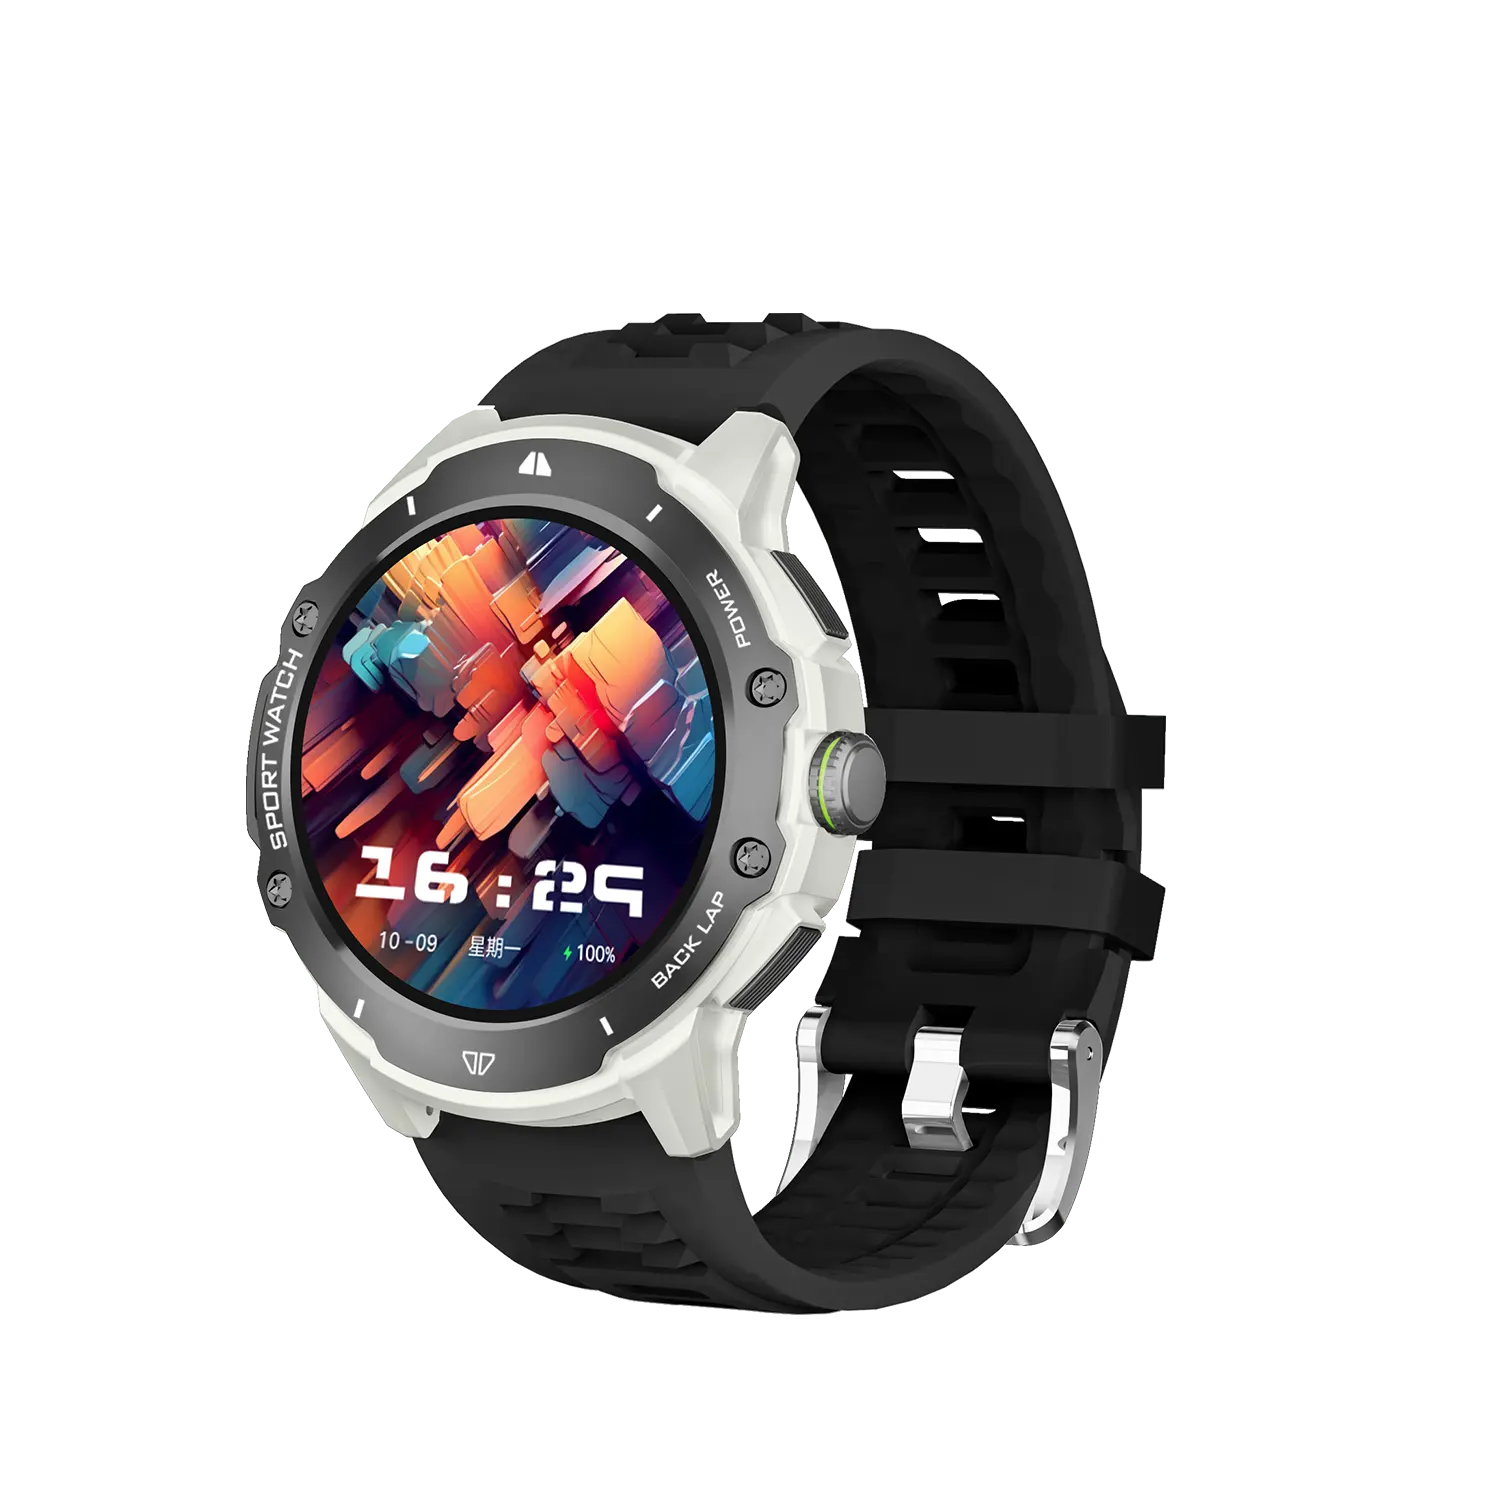 KB08 G15 Pro 1.43-Inch AMOLED Smart Watch WeChat TikTok Compatibility 4G Plug-in Answer Call Email Features iOS Silica Gel